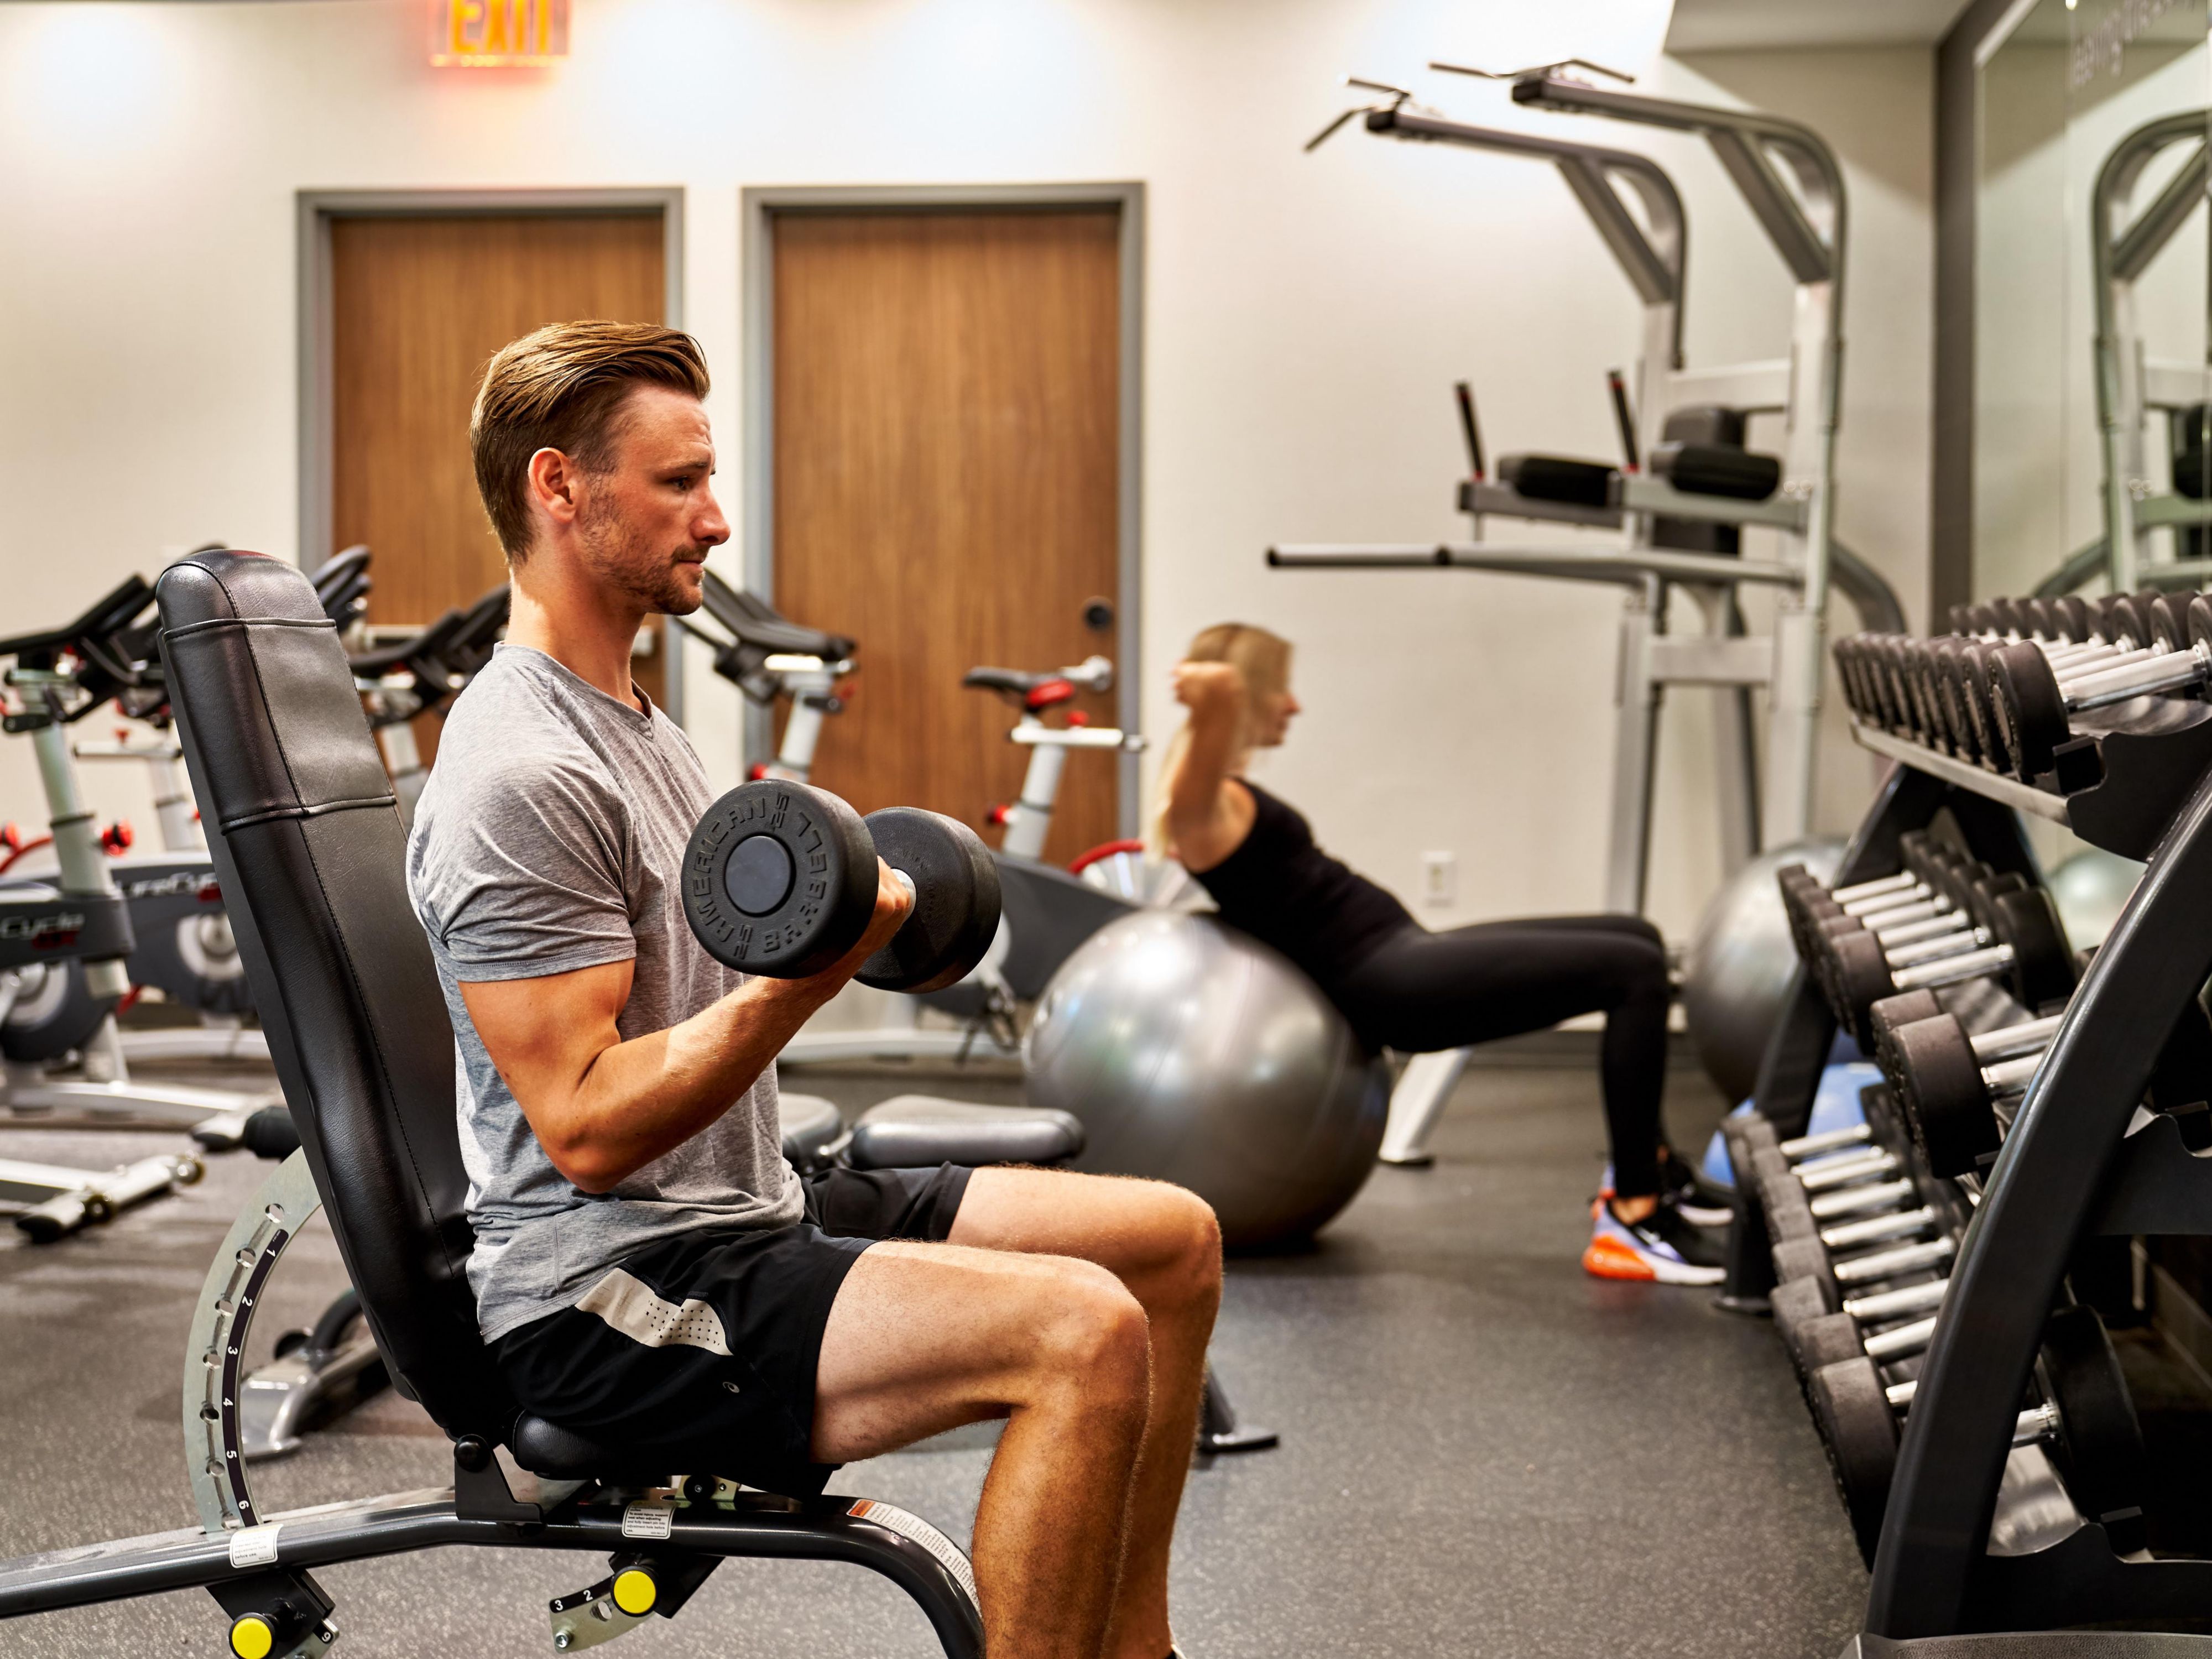 From Woodway Treadmills to fruit-infused water, our athletic studio has everything you need to keep up your workout routine. EVEN better? Our studio is open 24 hours a day, seven days a week. With multiple sets of each type of machine, there’s plenty of space for everyone. Feel your best everyday with our athletic studio. 
